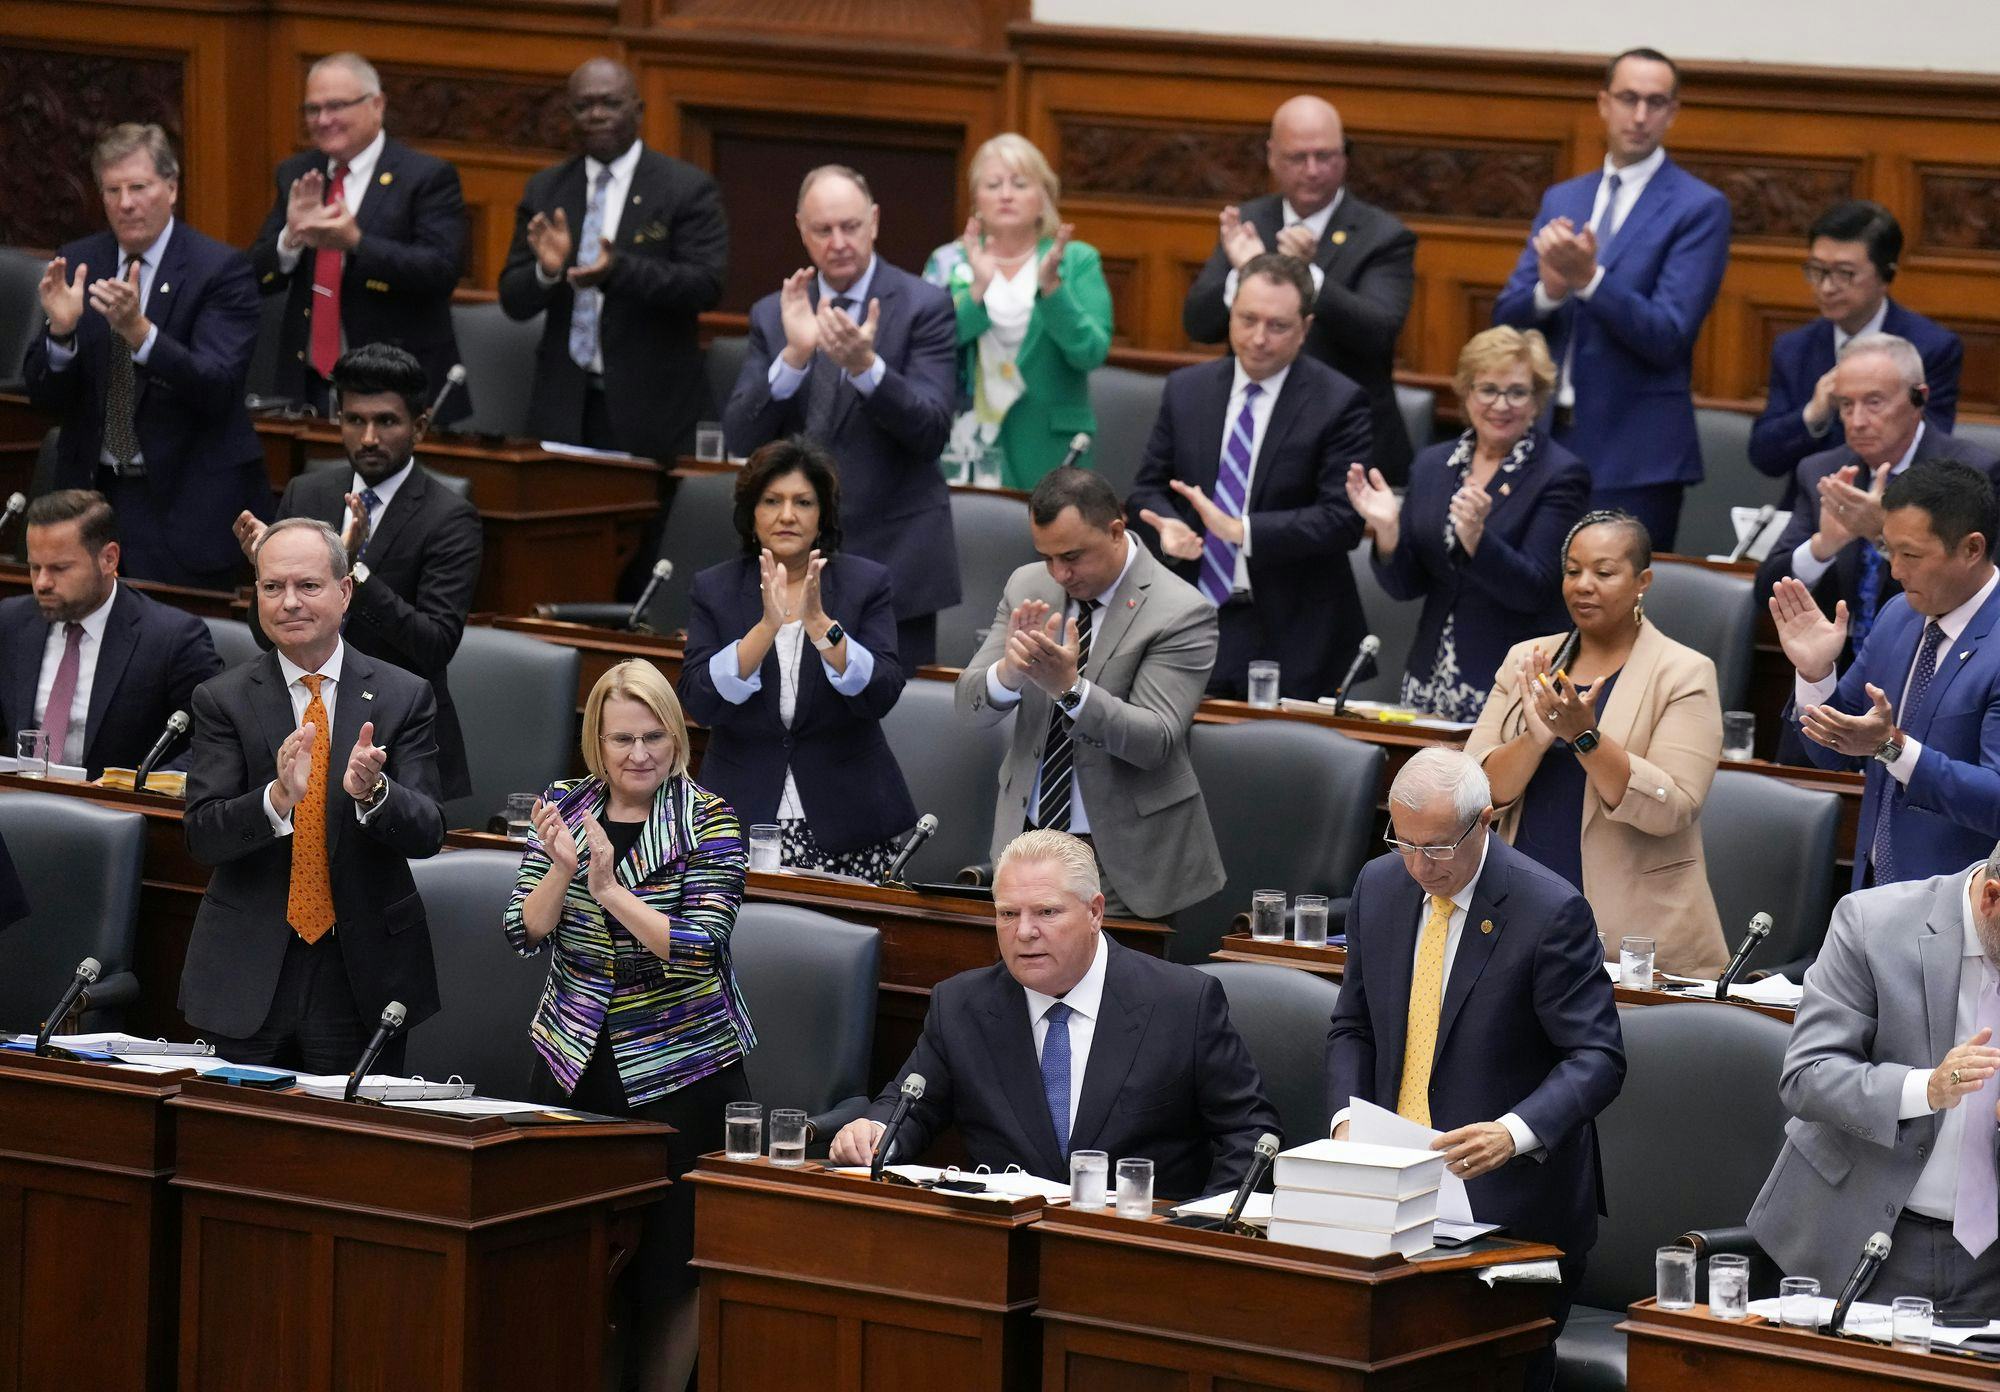 Revealed: the Ontario MPPs who miss the most votes at Queen's Park